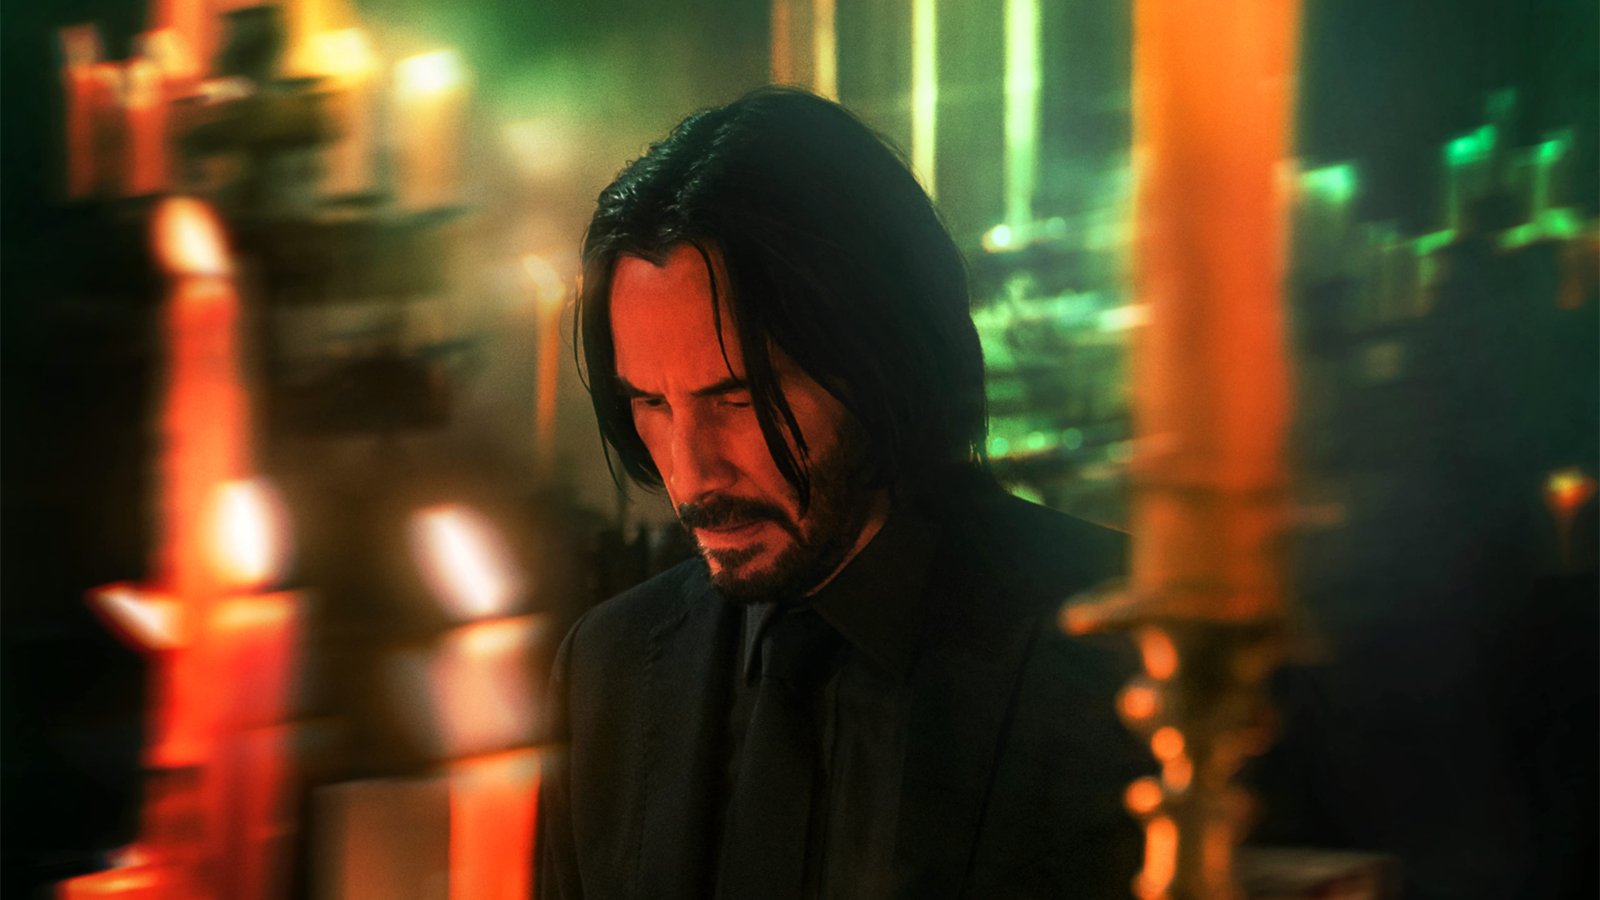 A screenshot from John Wick 2. He is surrounded by candles in a church